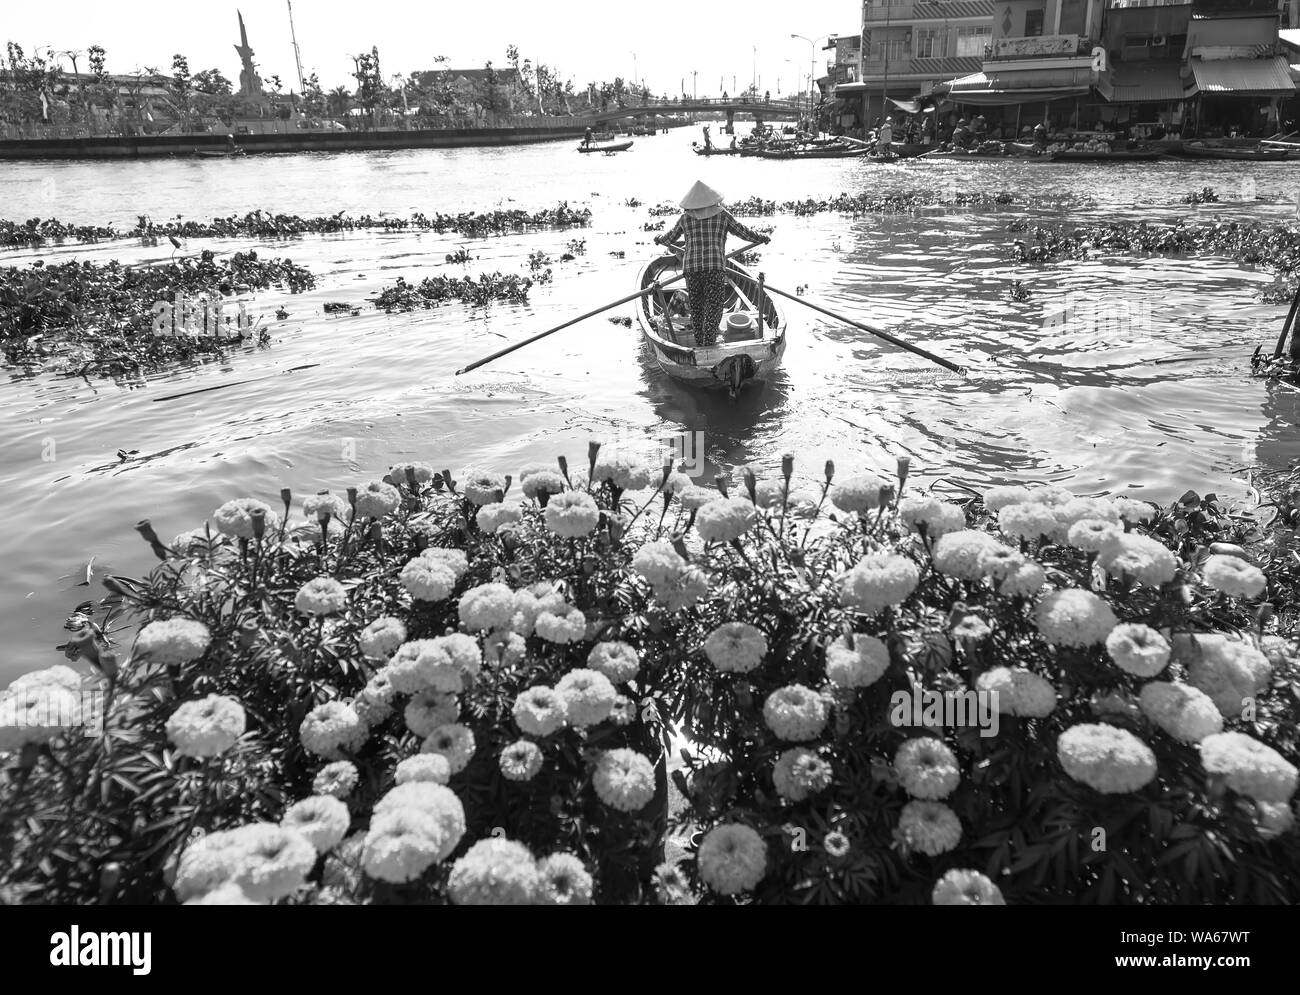 Ferryman rowing takes visitors across river to visit floating market with foreground marigold, this is main transportation Lunar New Year in Soc Trang Stock Photo